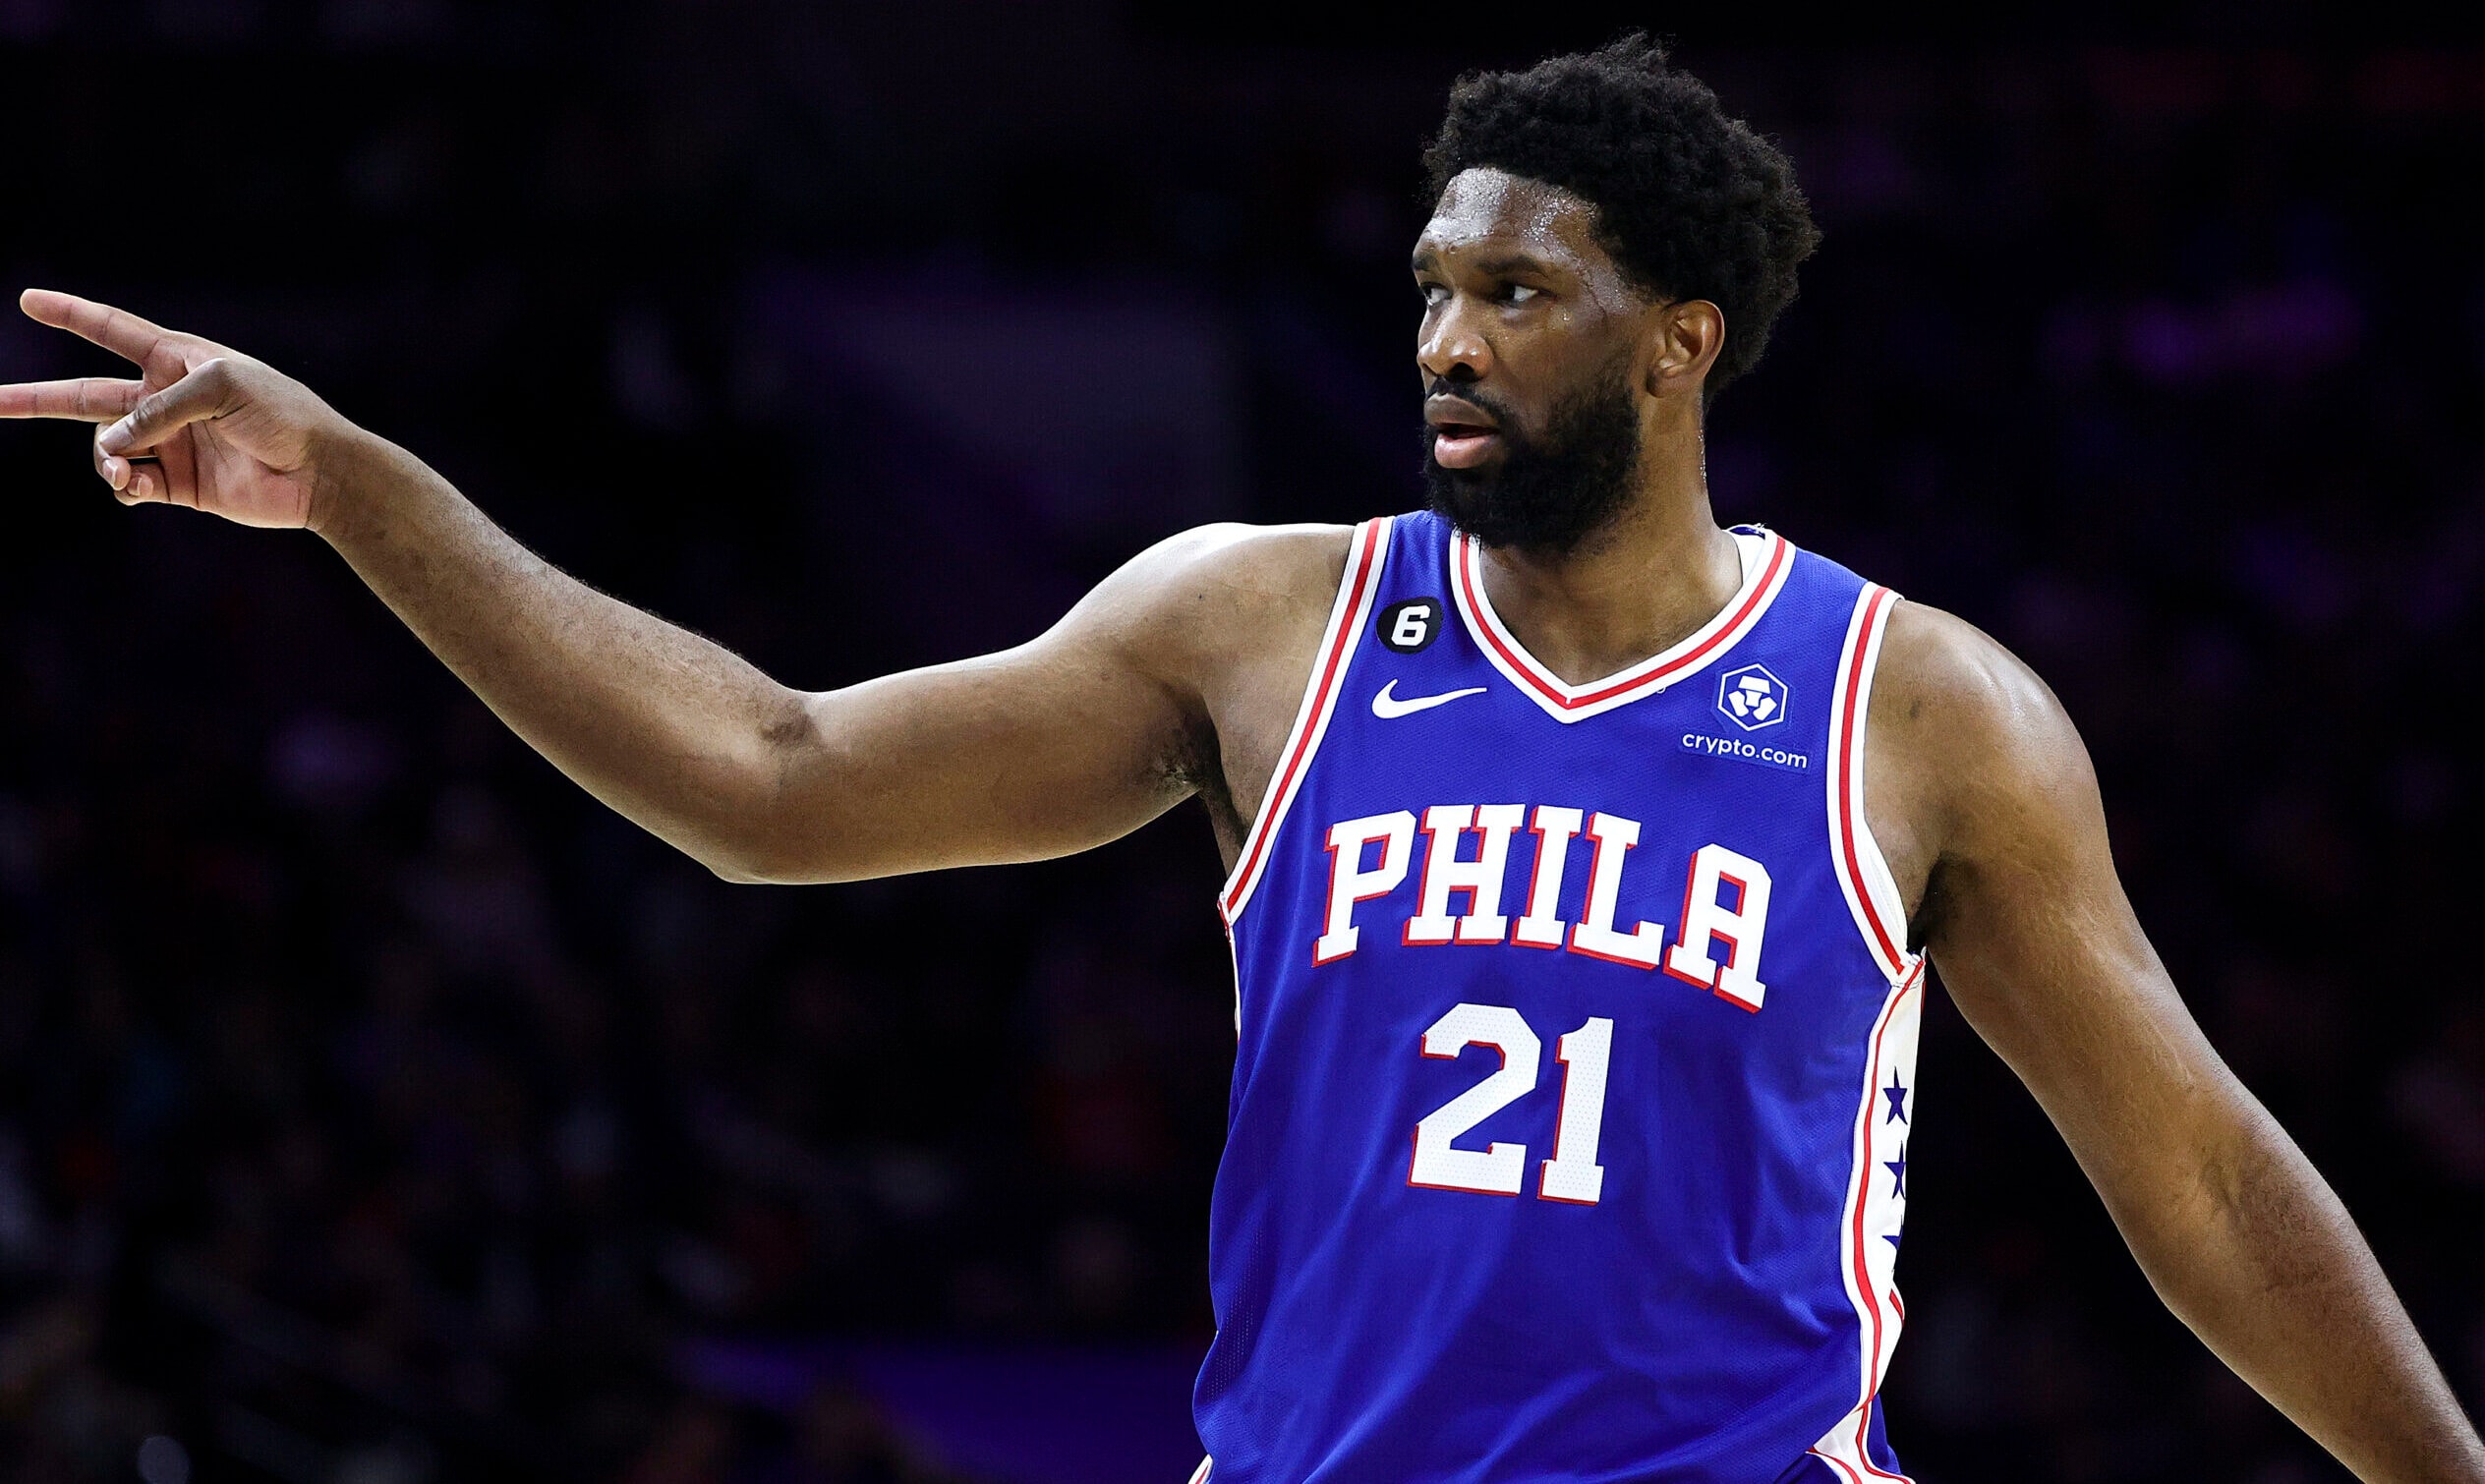 Joel Embiid, Sixers' Joel Embiid Trade To The Warriors In Proposal